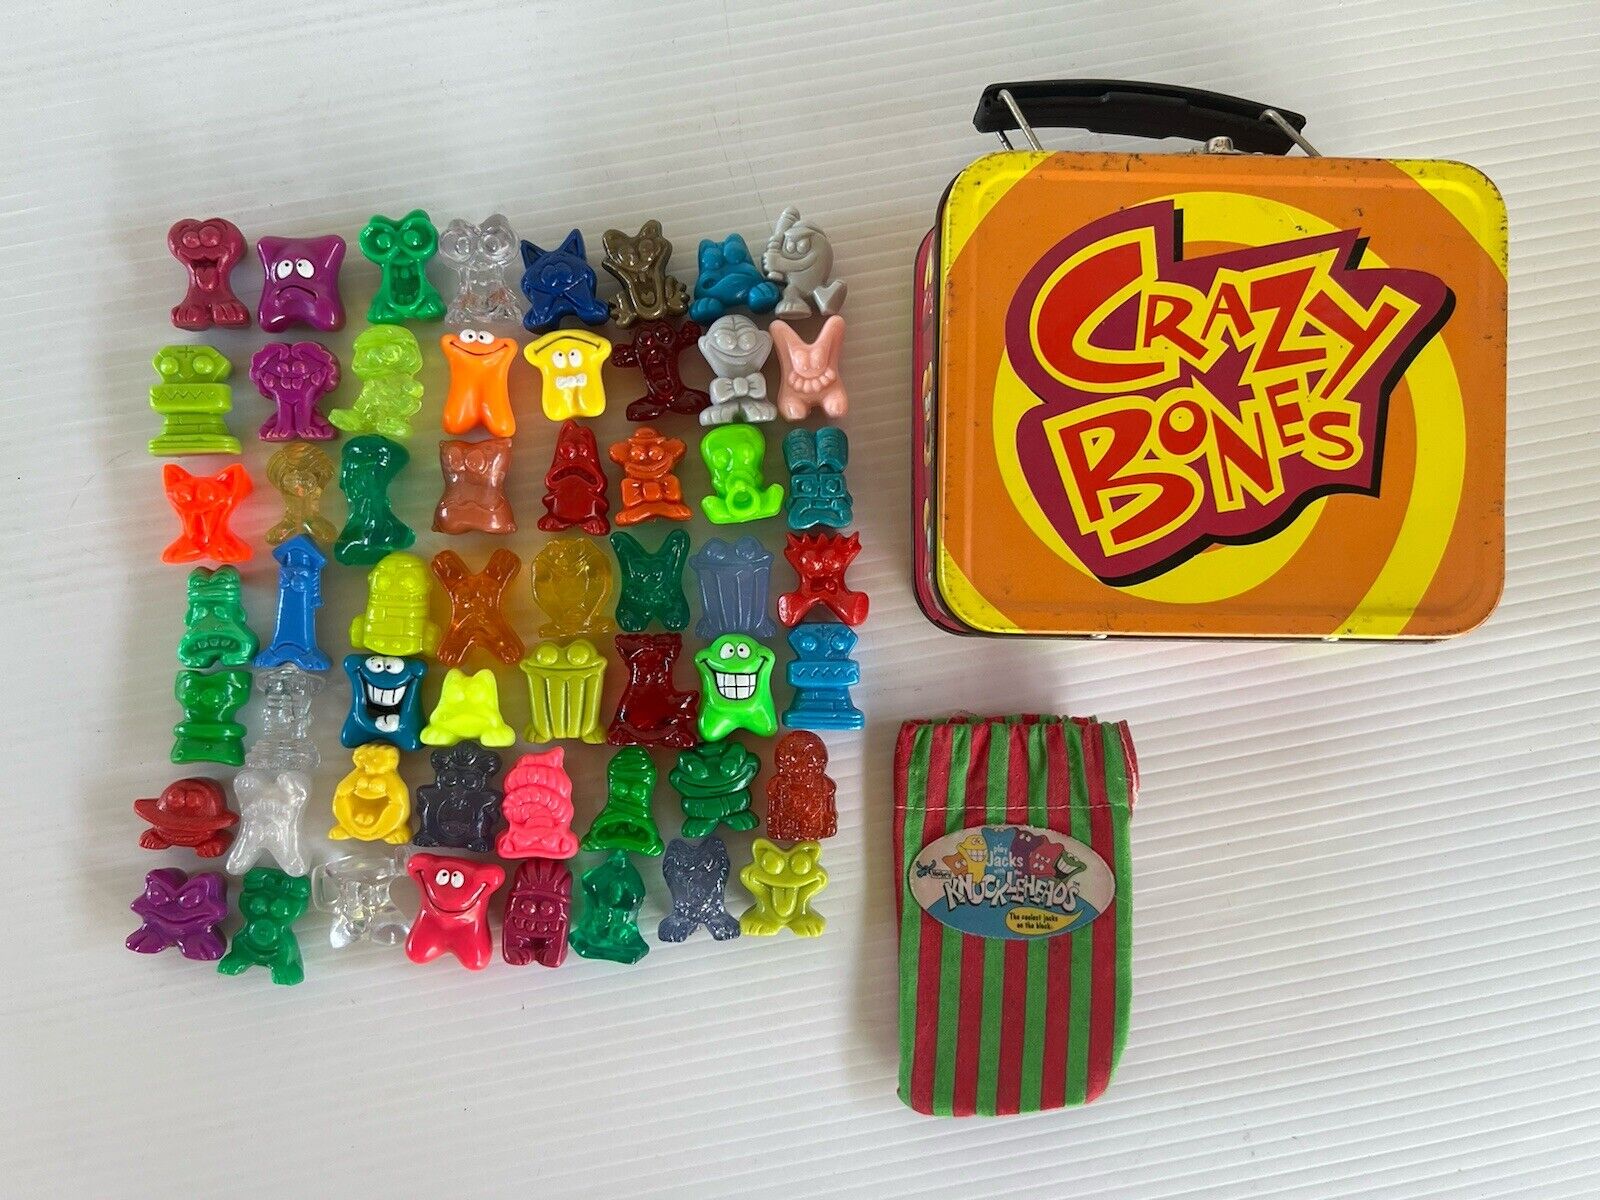 GoGo's Crazy Bones Tin Carry Case  Collector's Kit Mixed With Jacks Knuckleheads